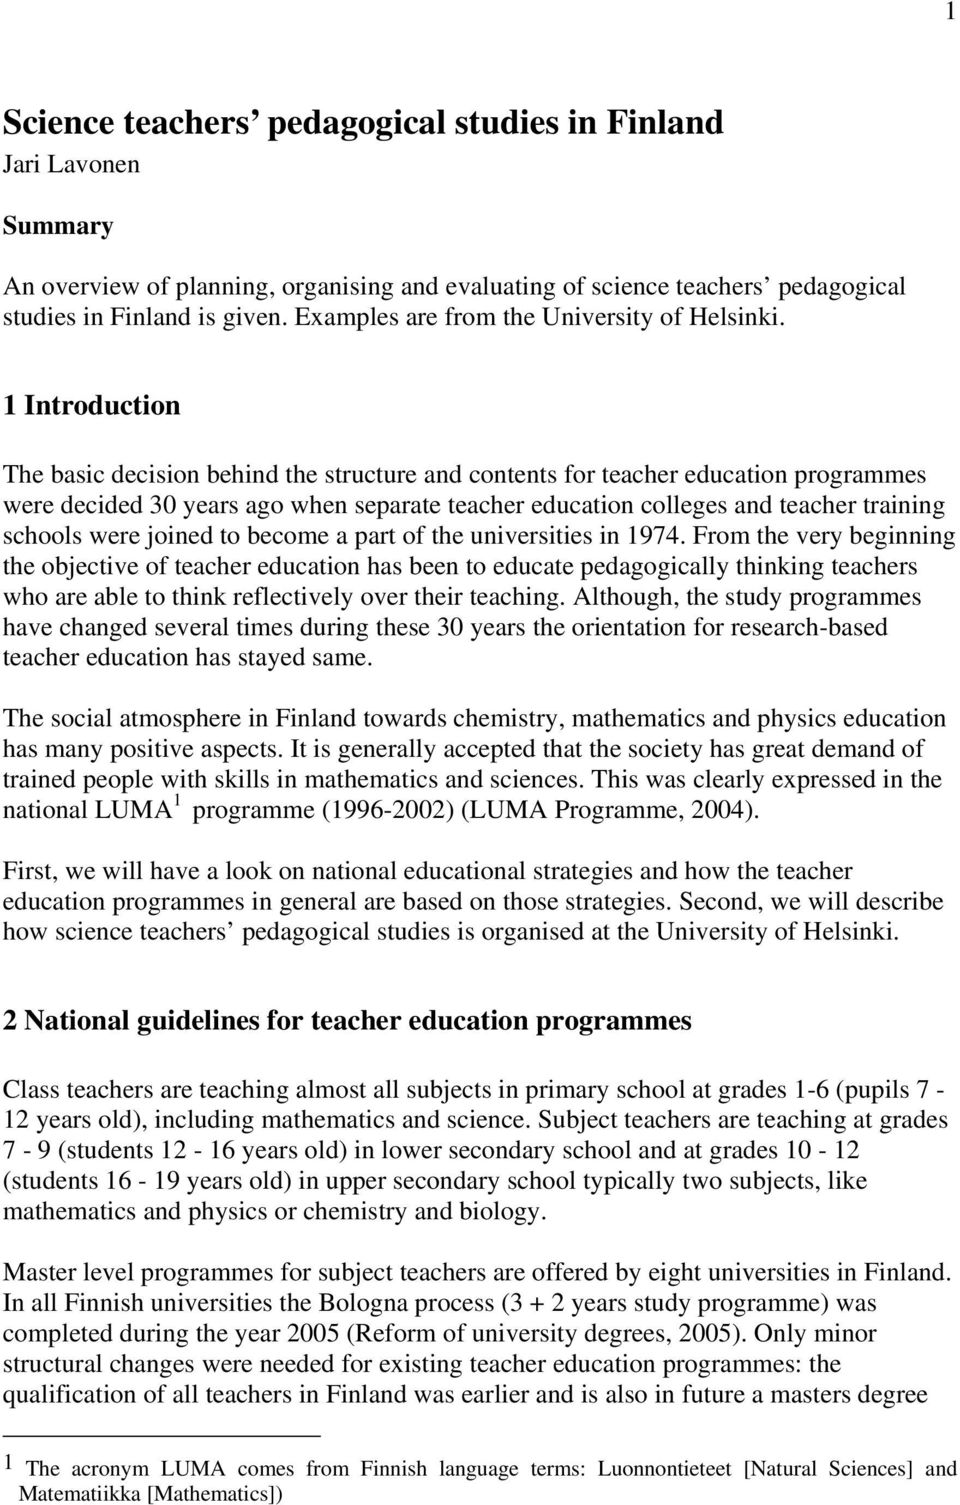 1 Introduction The basic decision behind the structure and contents for teacher education programmes were decided 30 years ago when separate teacher education colleges and teacher training schools